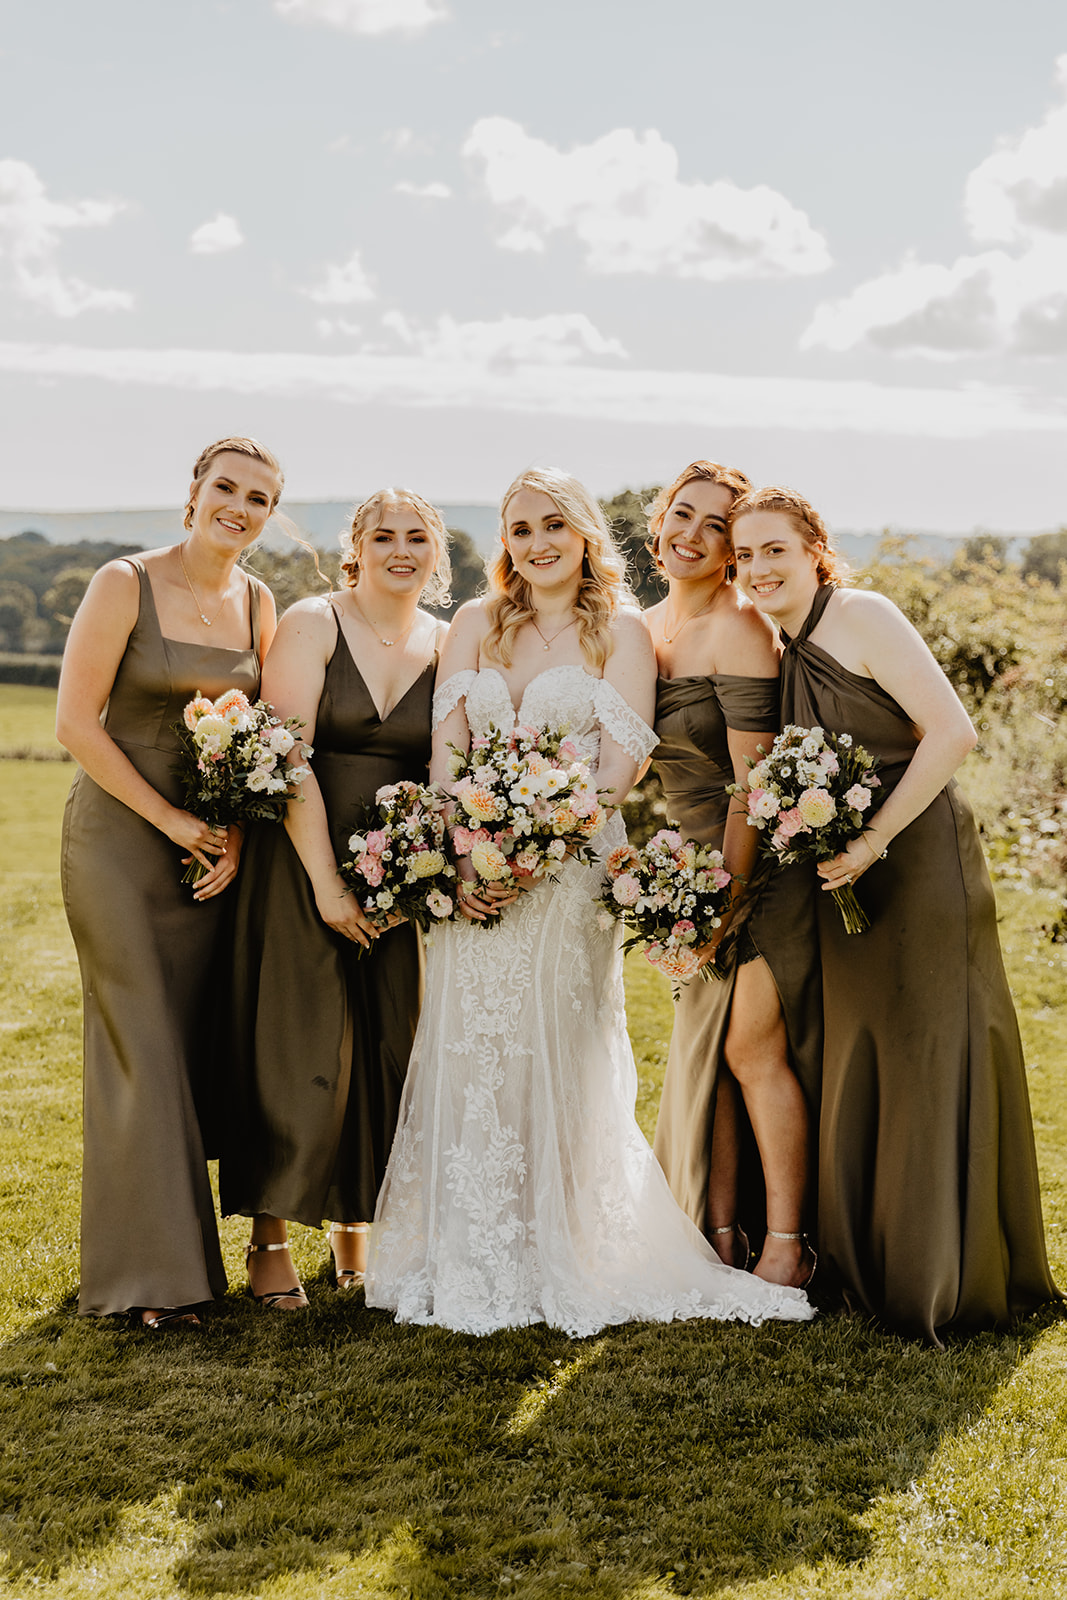 Bridesmaids at a Southlands barn wedding, Sussex. Photo by OliveJoy Photography.